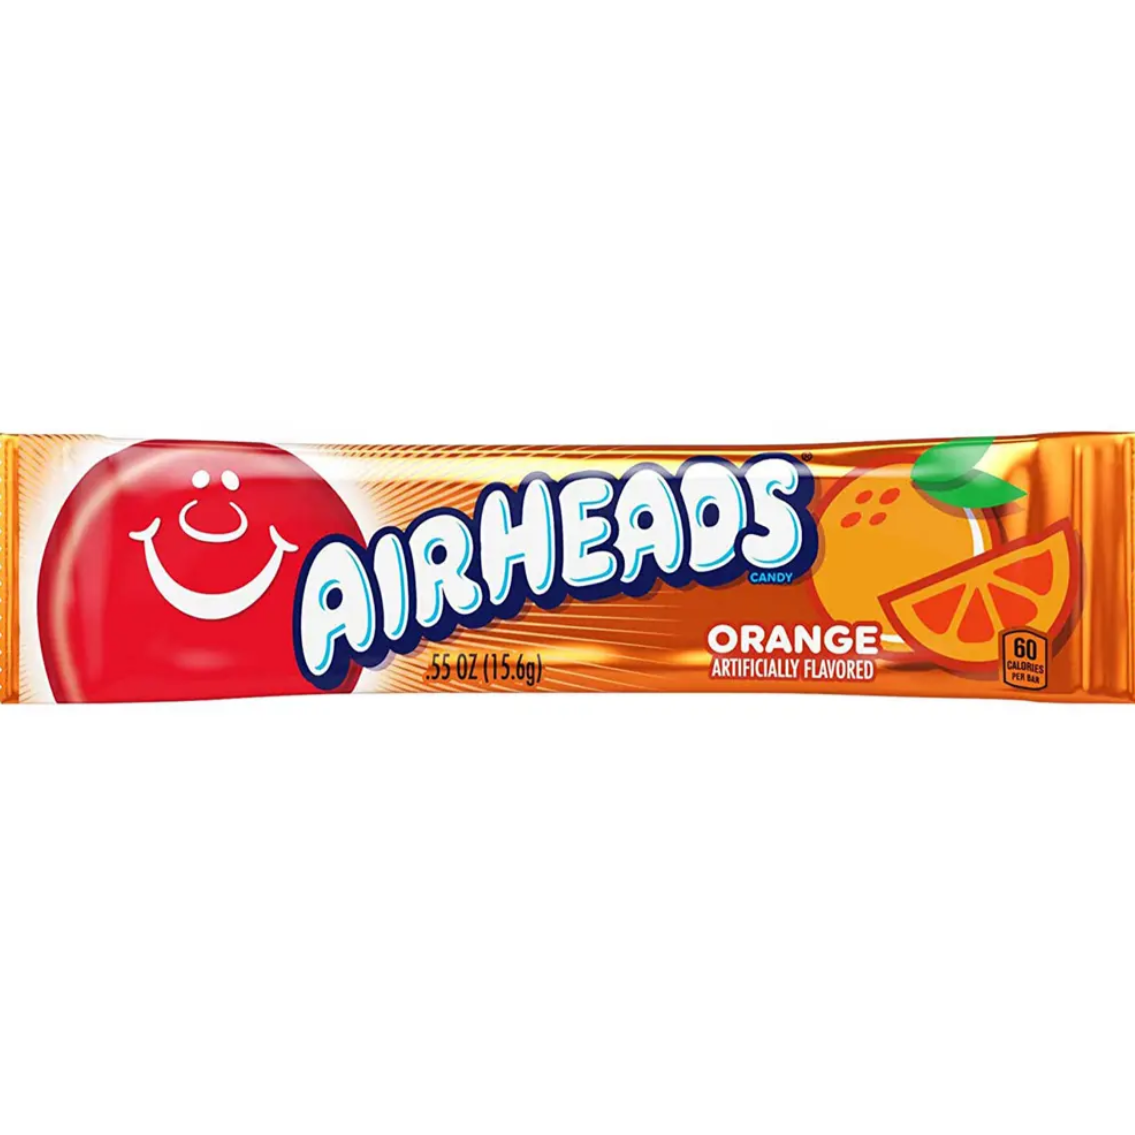 Airheads singles: 5 Flavours